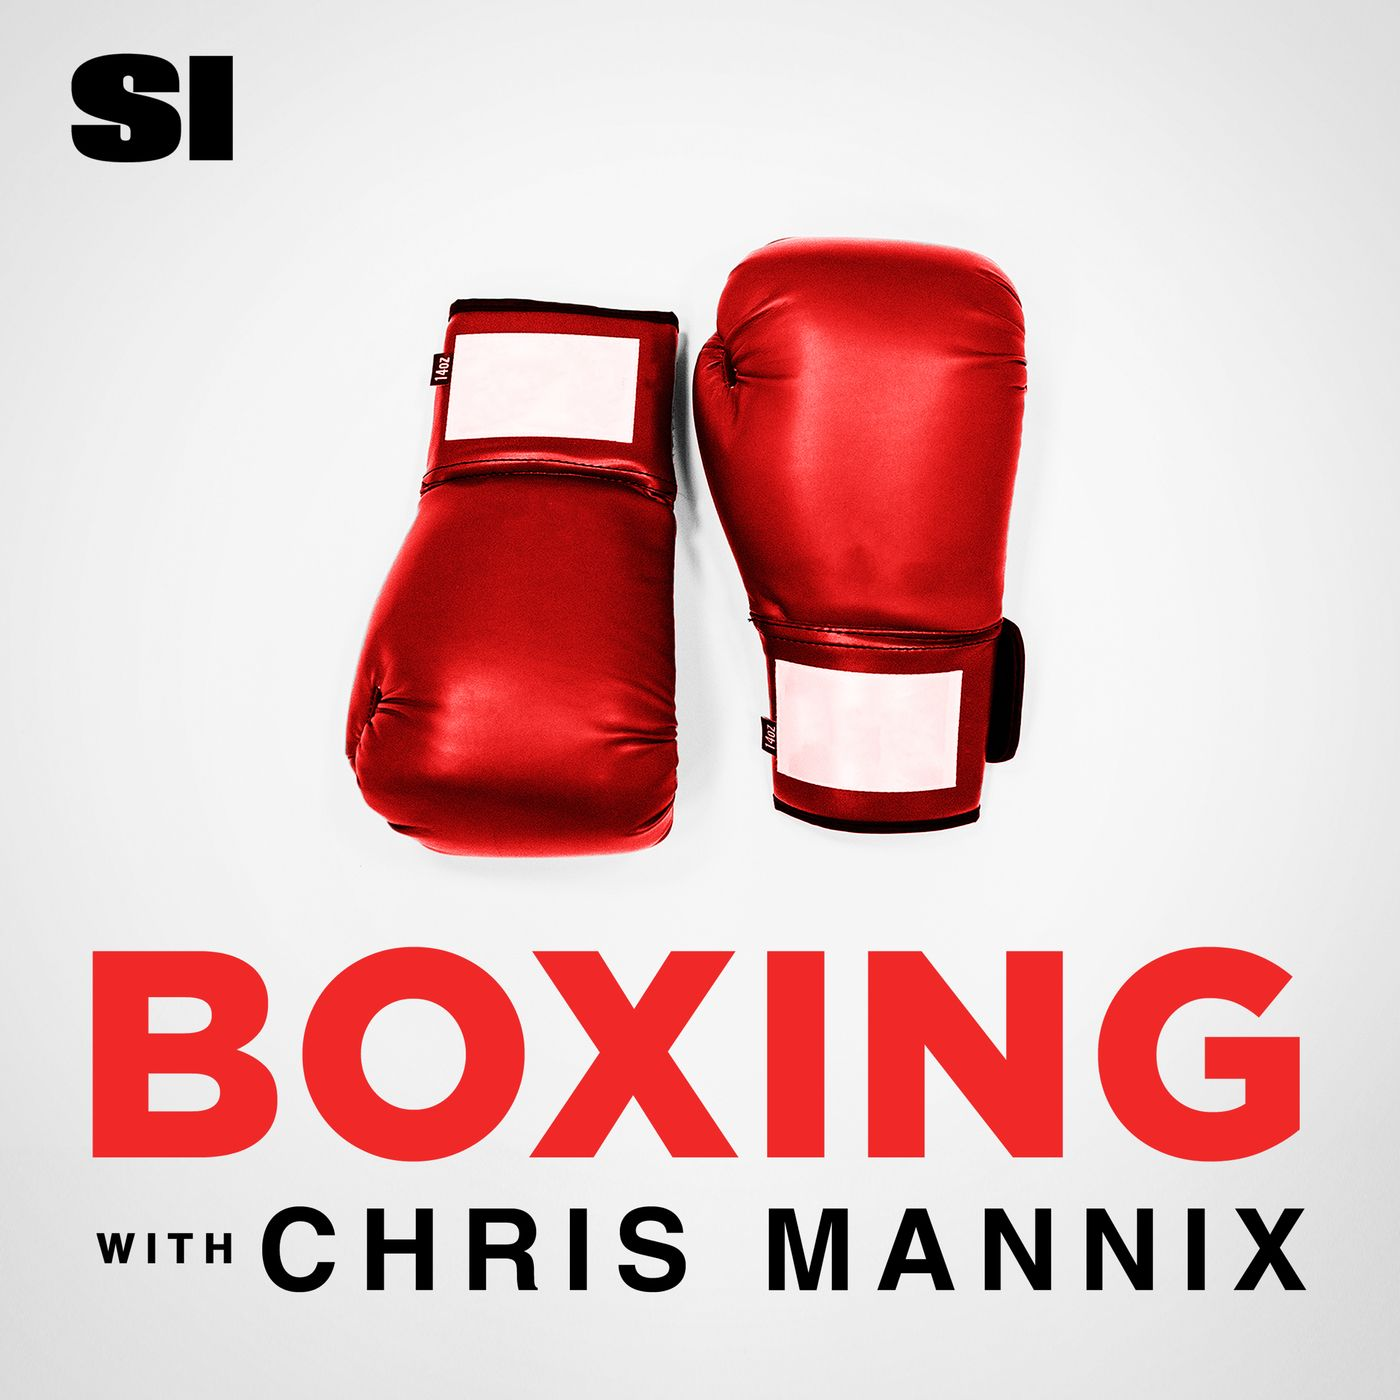 A highlight from Boxing with Chris Mannix - Who is the Greatest Woman in Boxing